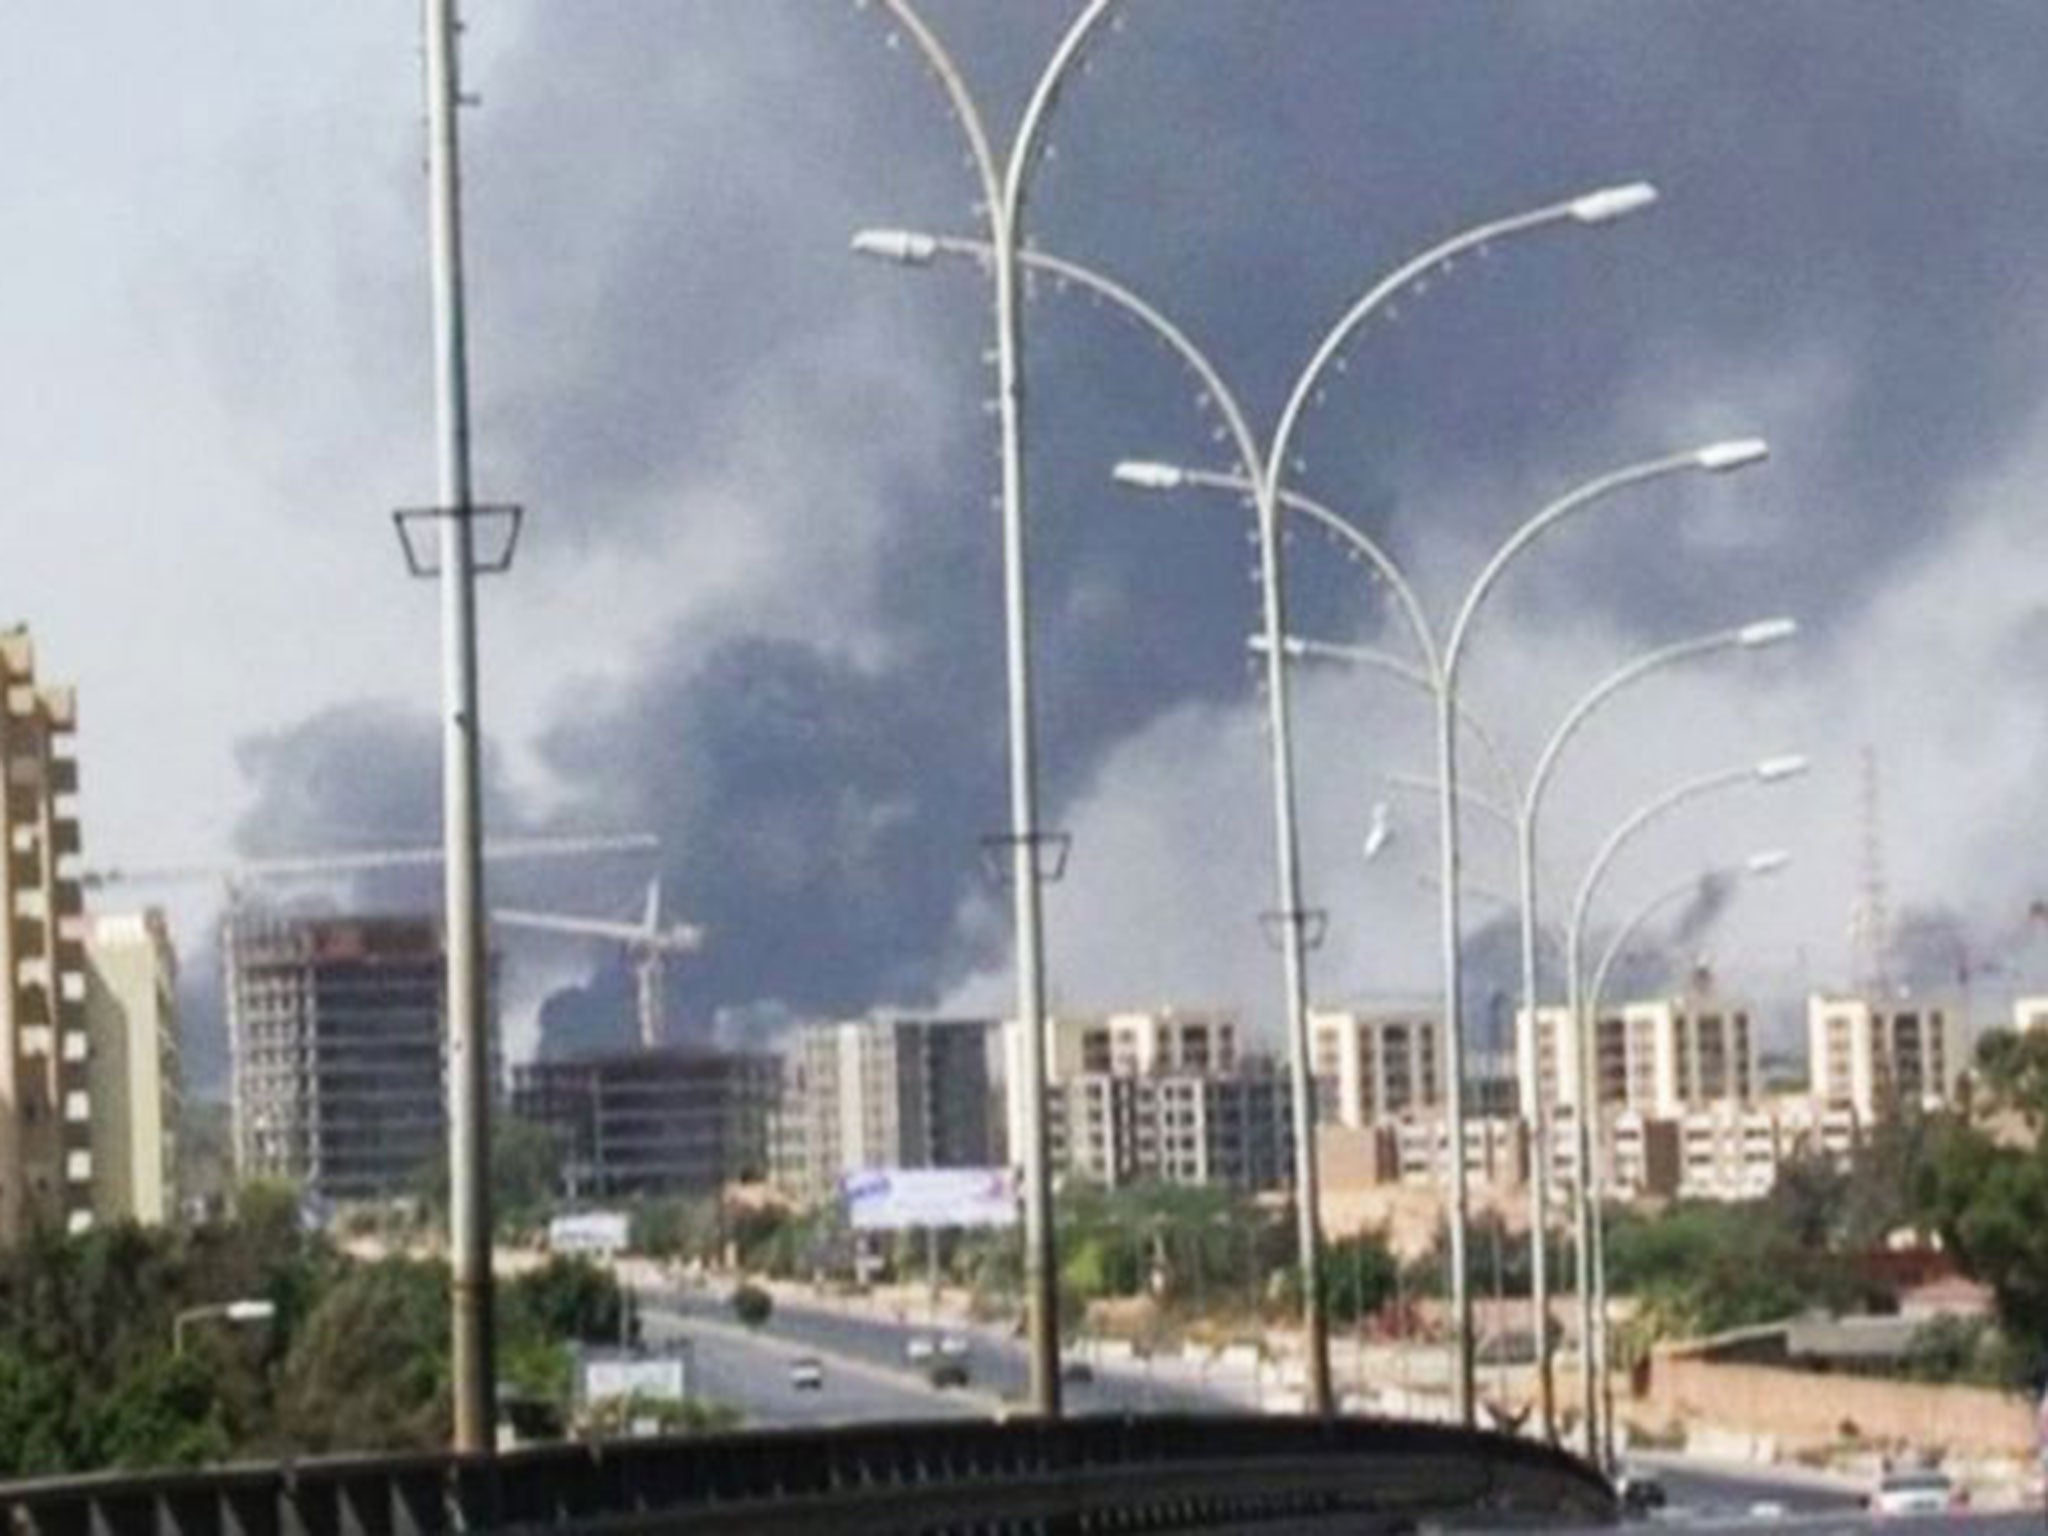 Smoke rises from the airport where rebel militias fight